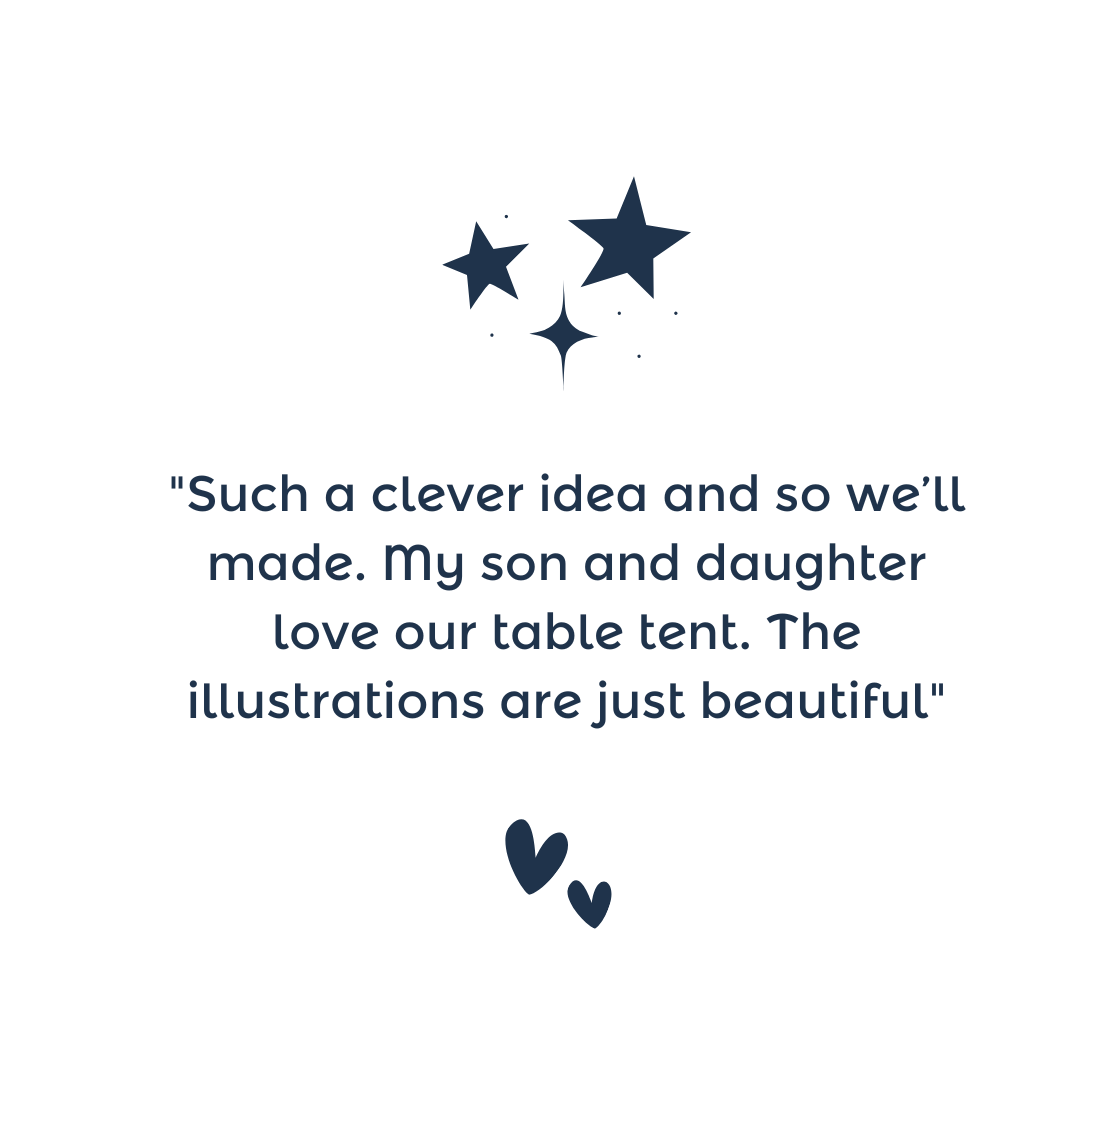 "Such a clever idea and so we’ll made. My son and daughter love our table tent. The illustrations are just beautiful"